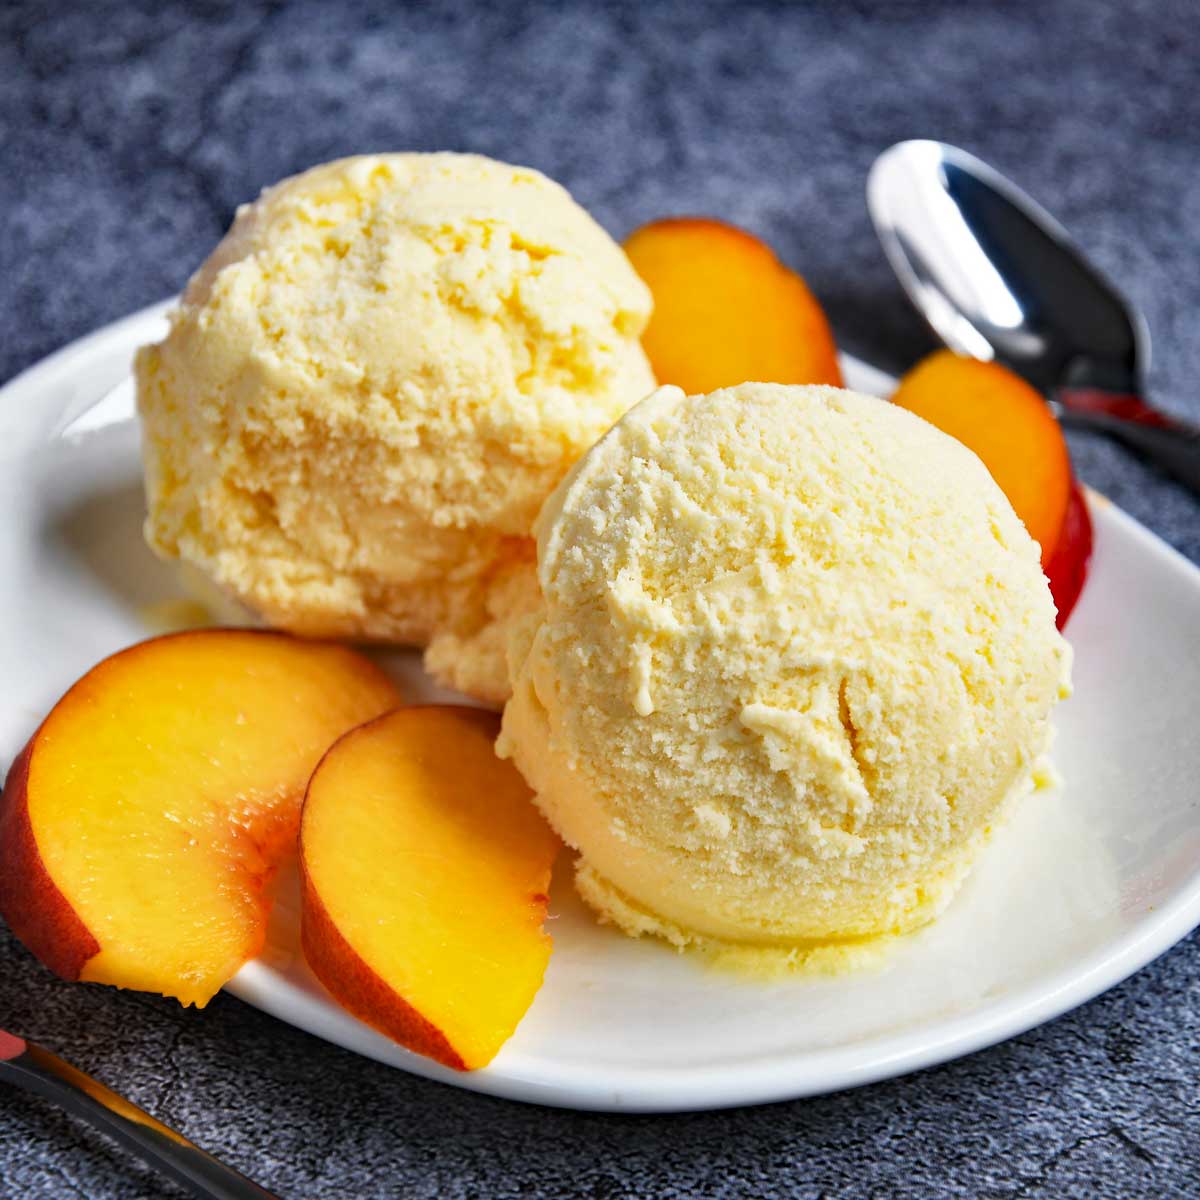 How To Make Peach Ice Cream Without An Ice Cream Maker